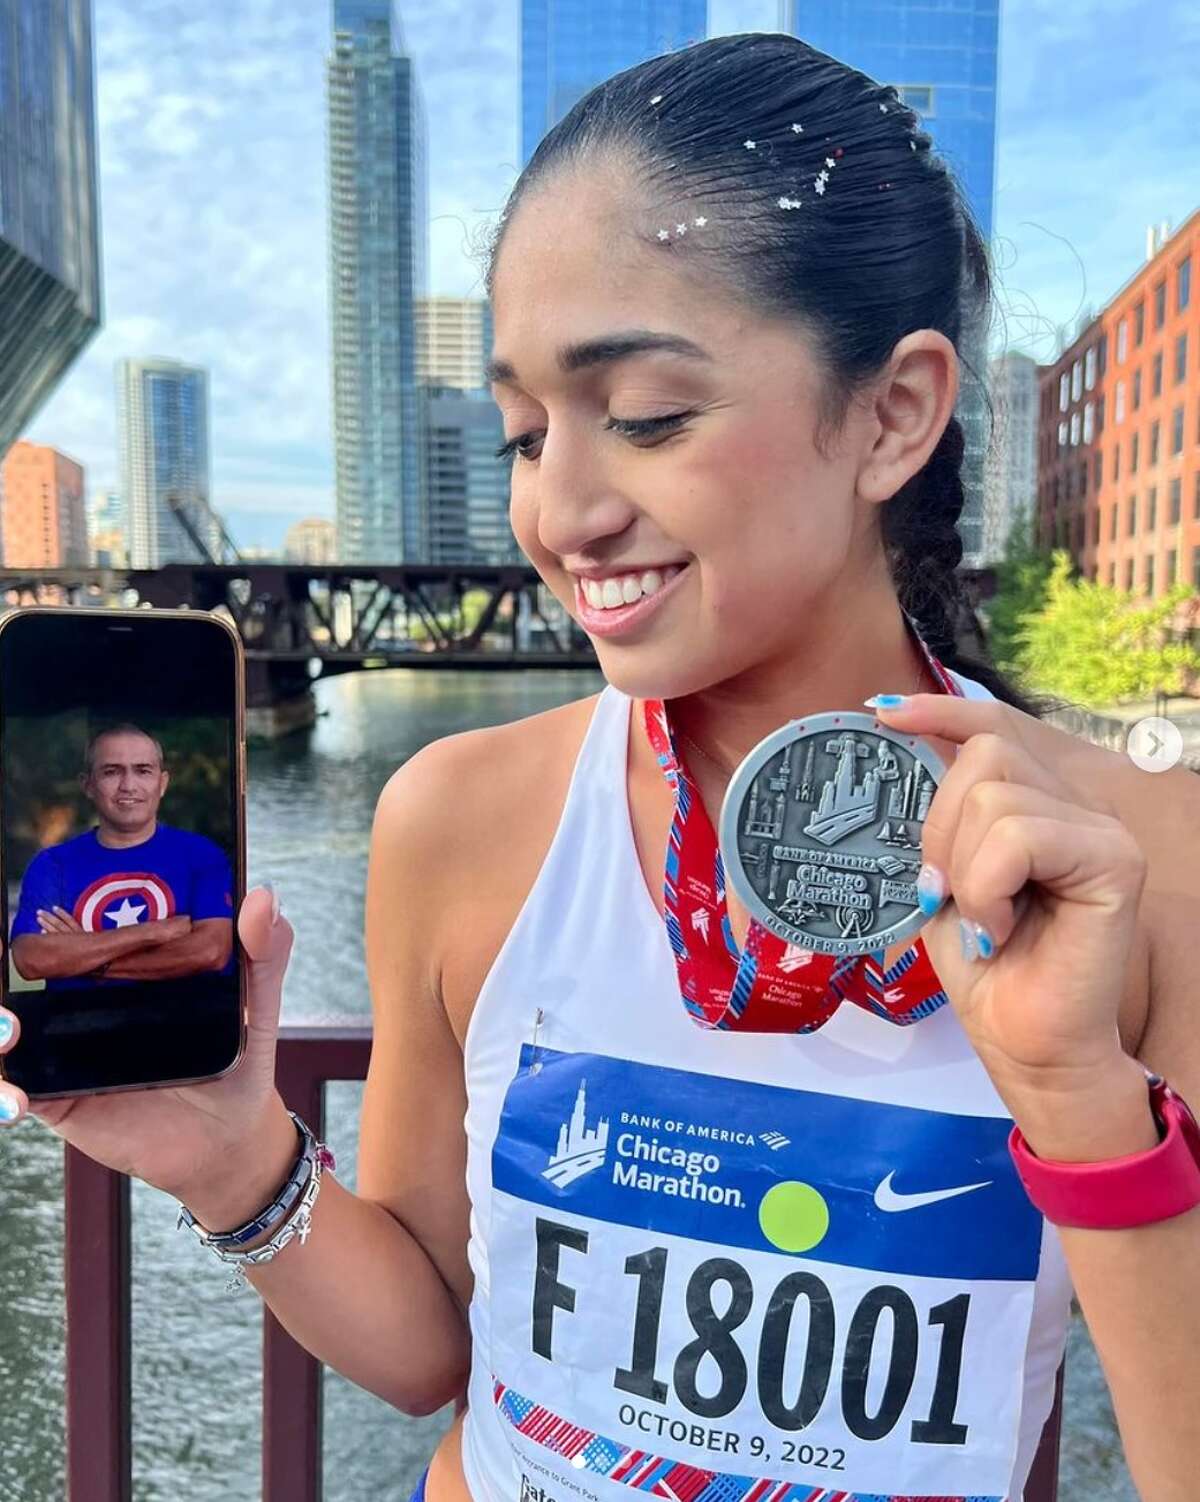 Laredo's Arabellah Hope Lozano honored her father, Juan Lozano, by winning the 19-and-under division at the Chicago Marathon on Oct. 9, 2022. She is pictured after the race with her winning medal and the photo of her father.